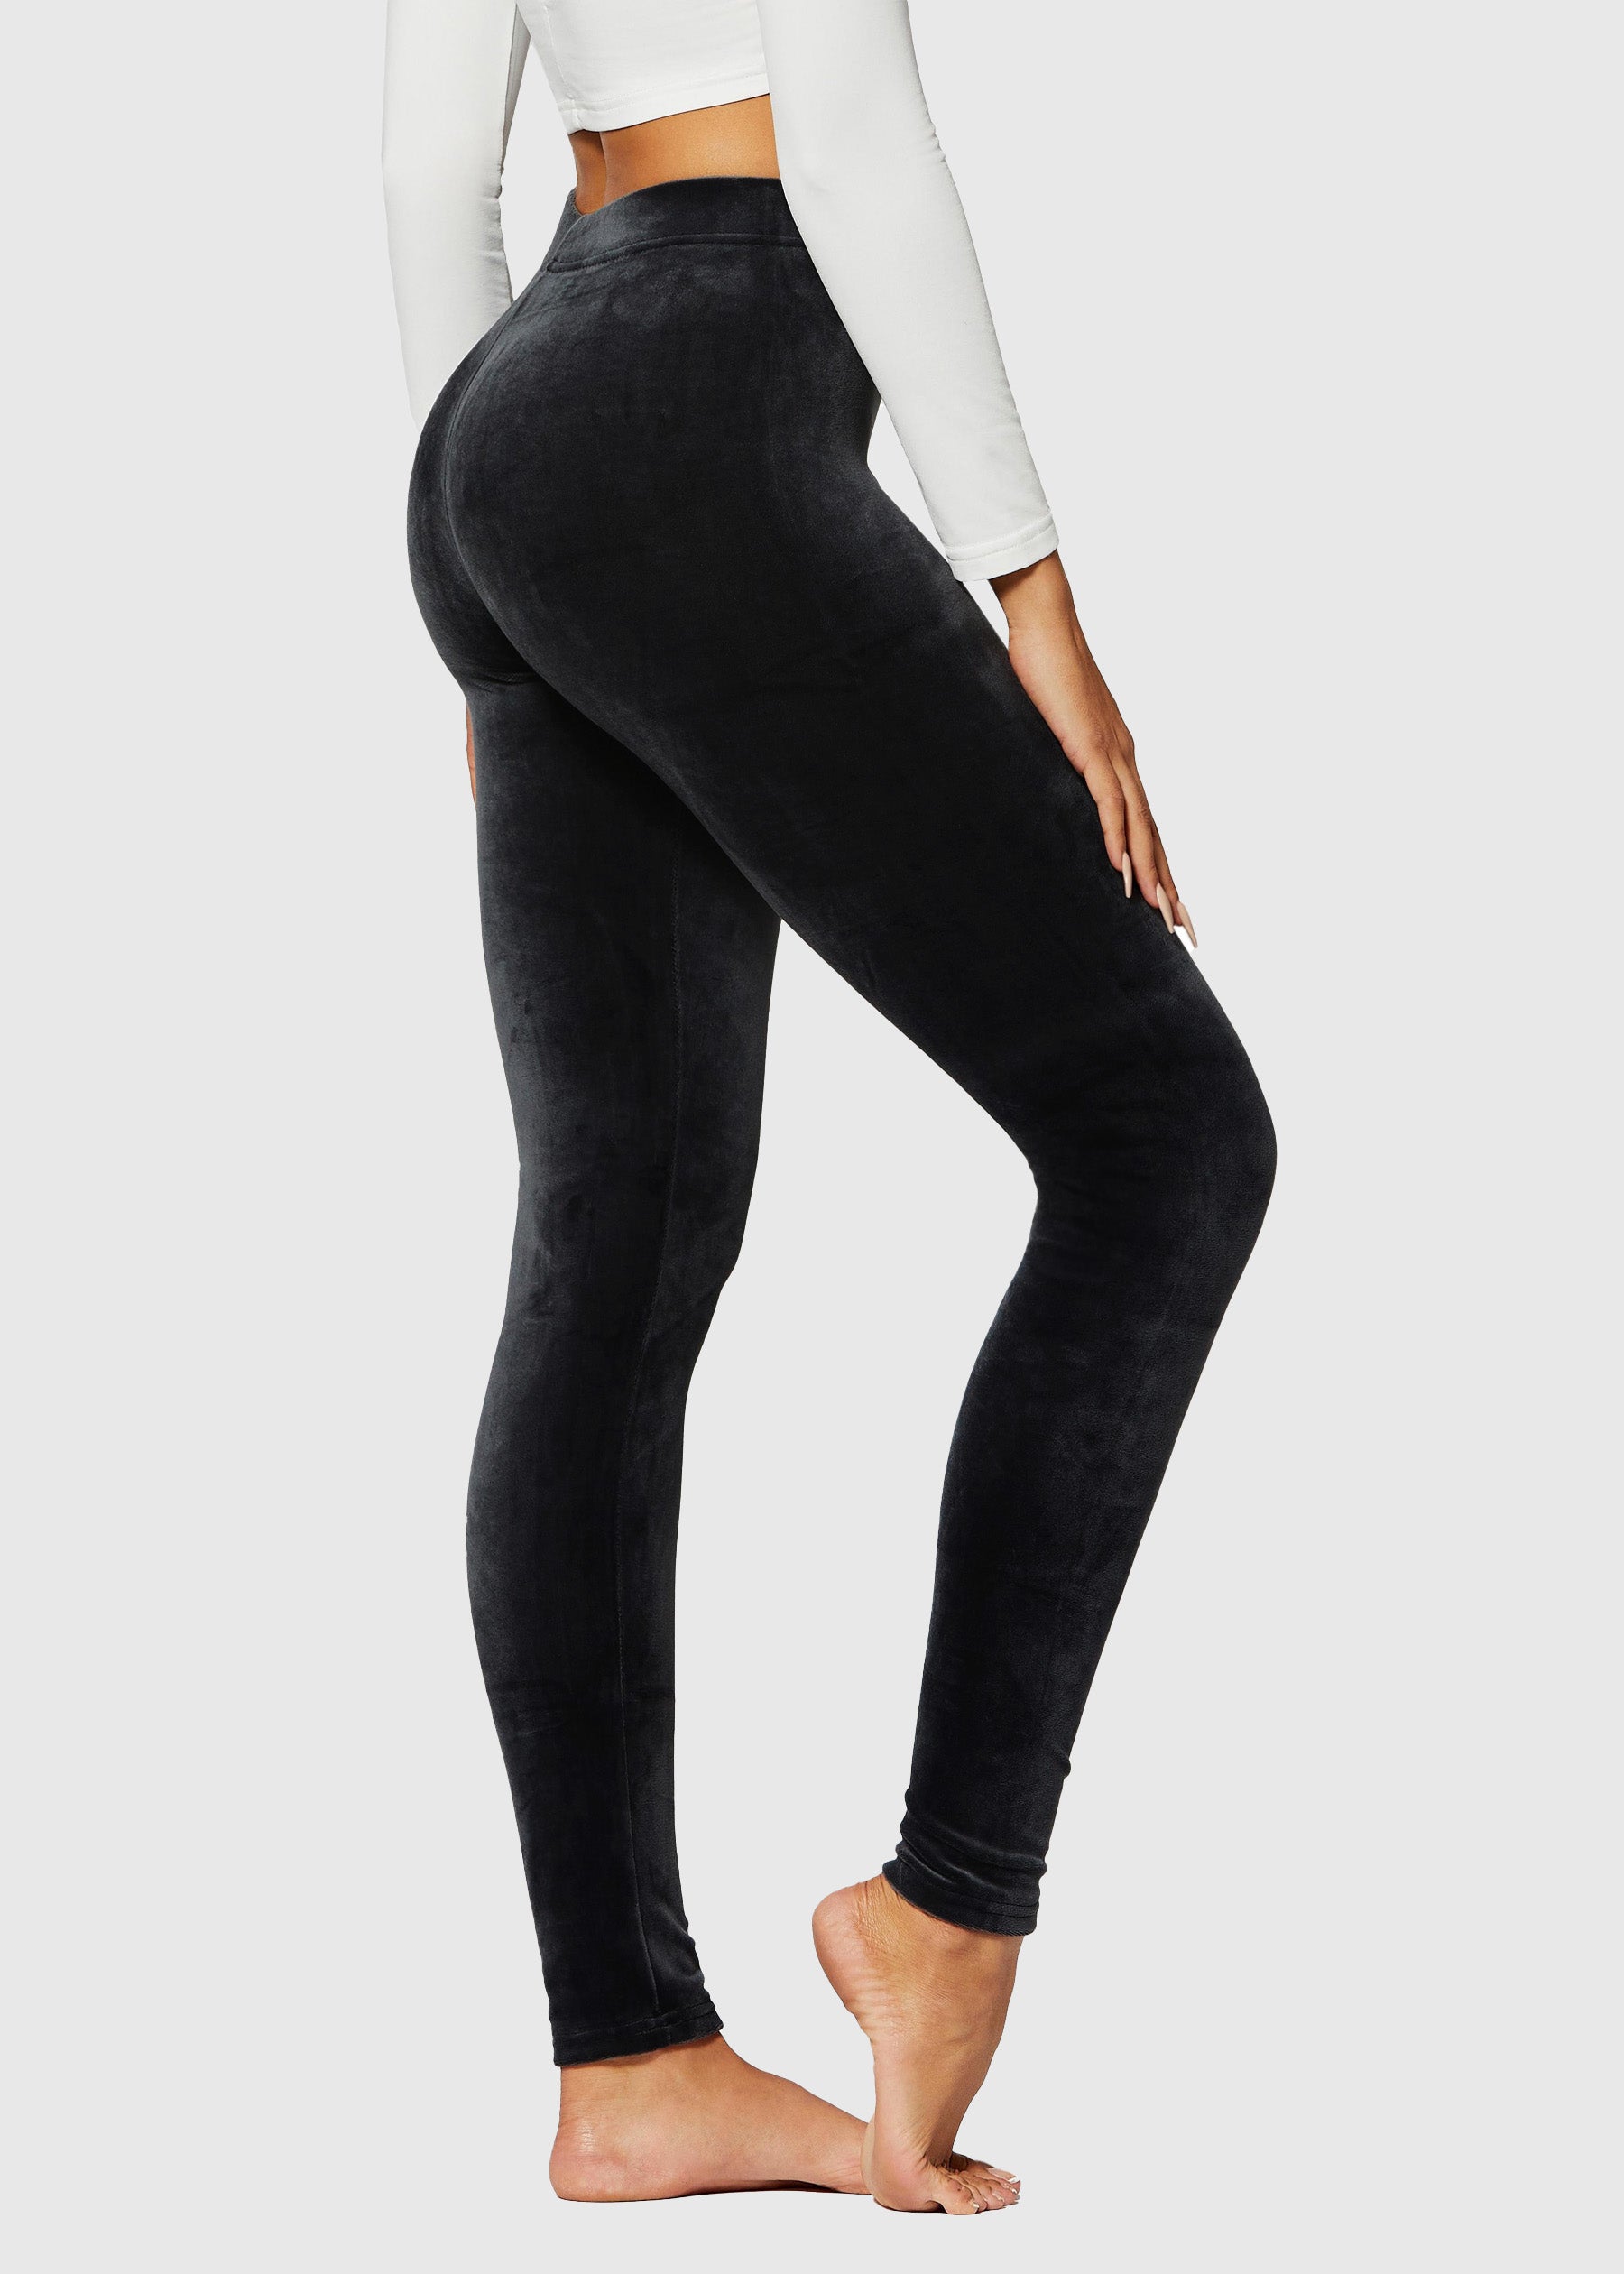 Conceited Fleece Lined Leggings Black Size 4 - $13 (48% Off Retail